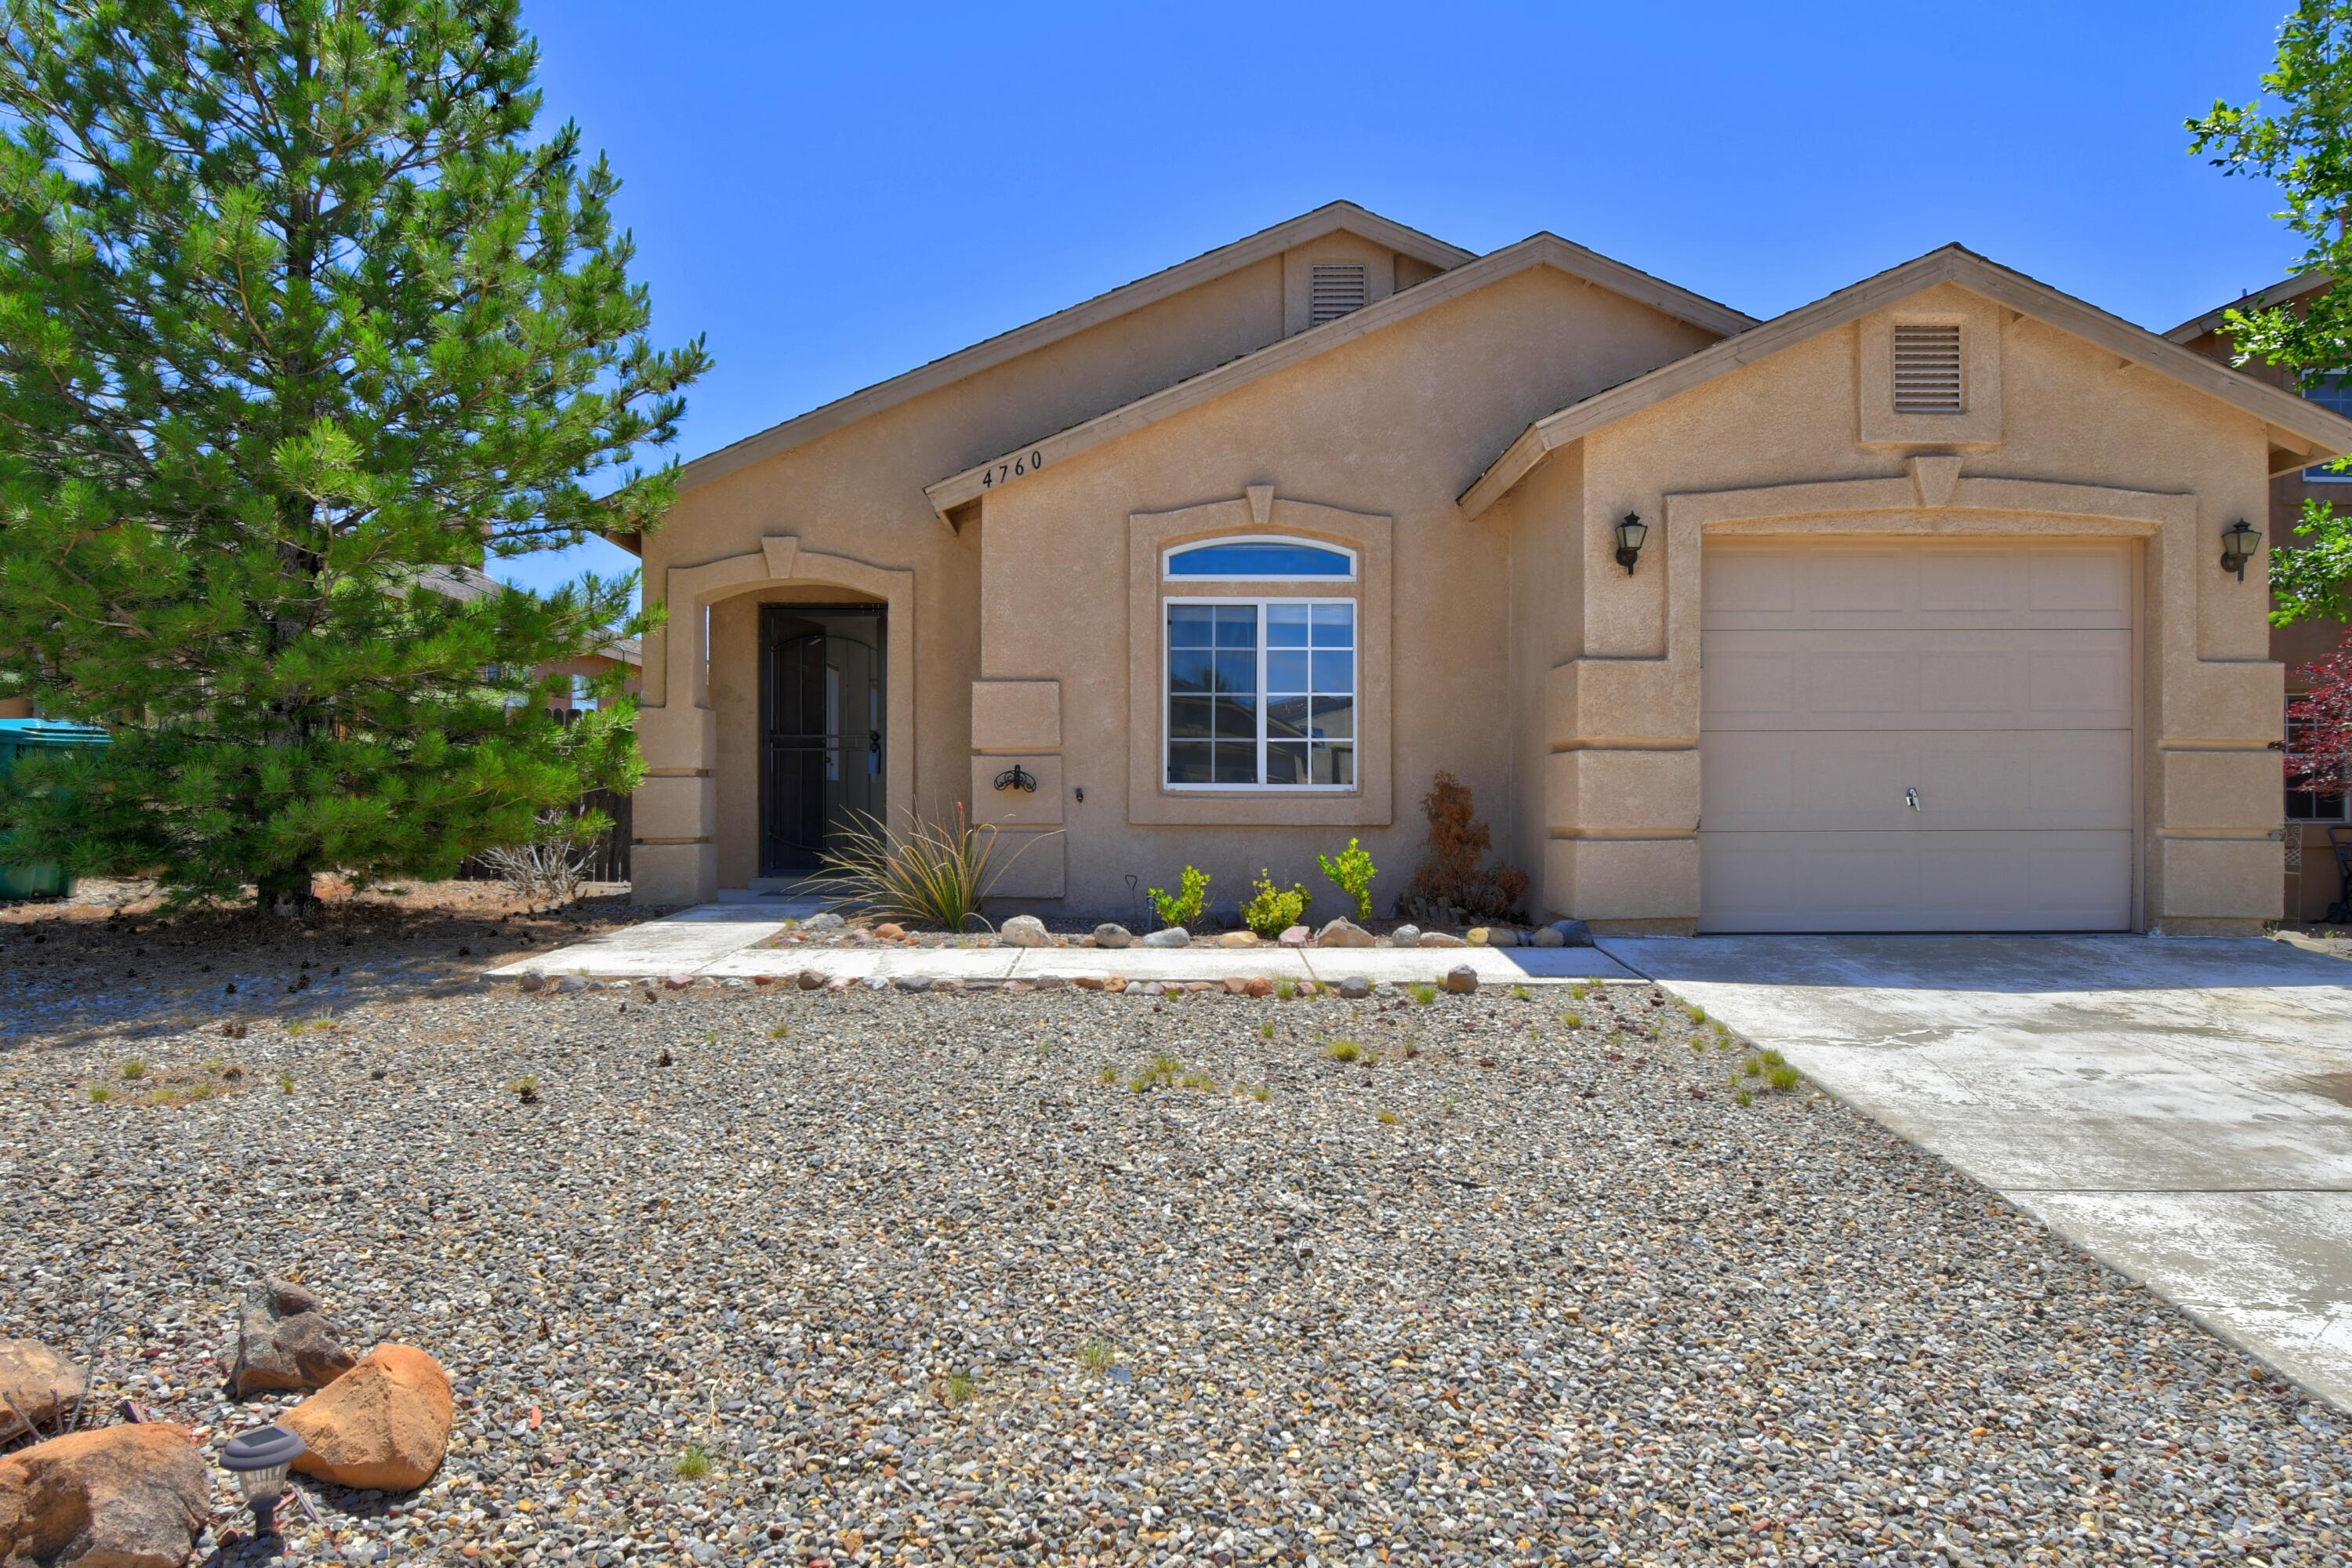 Beautiful home with amazing views on a premium lot in Enchanted Hills. This home has an open floor plan that with 2BR, 2BA, living room, kitchen & dining area, 1CG, vaulted ceilings, refrigerated air & more! Close access to I-25, plus minutes from parks, shopping, schools & more!